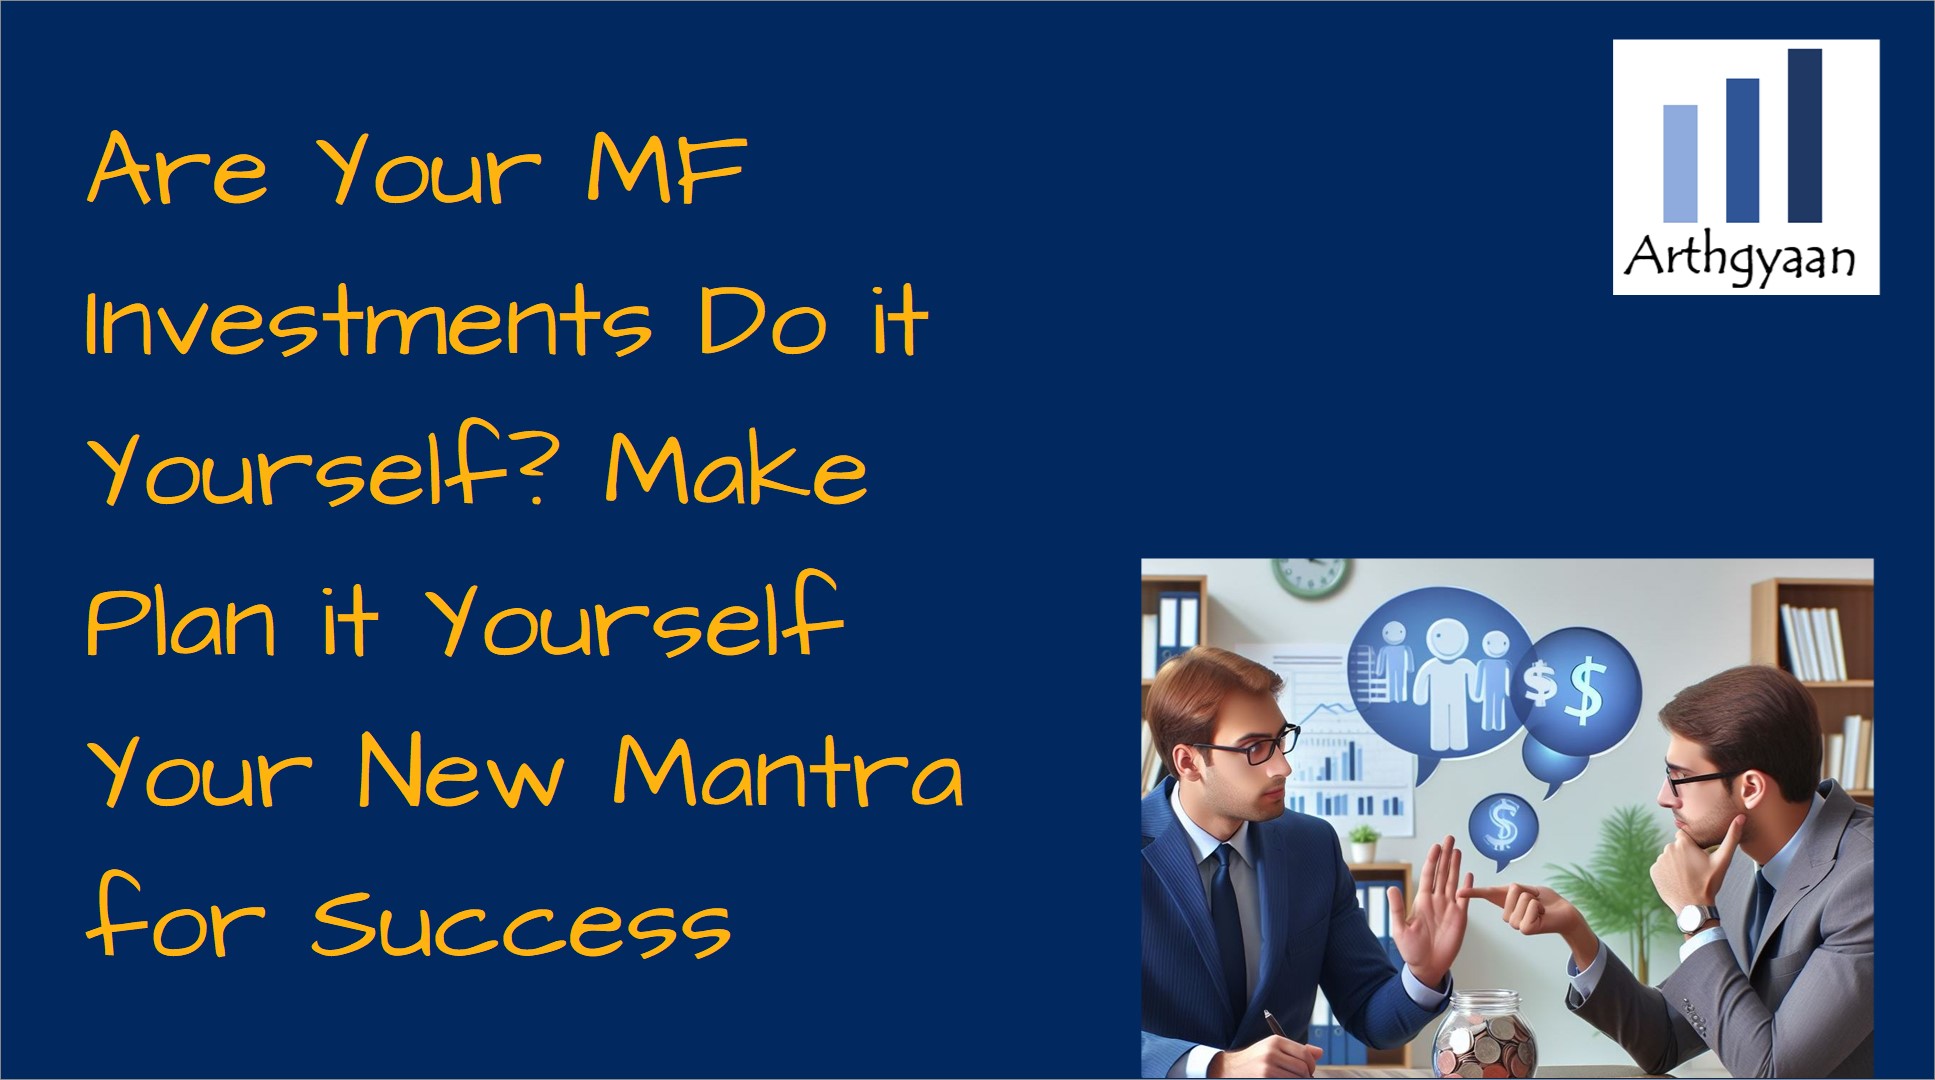 Are Your MF Investments Do it Yourself? Make Plan it Yourself Your New Mantra for Success